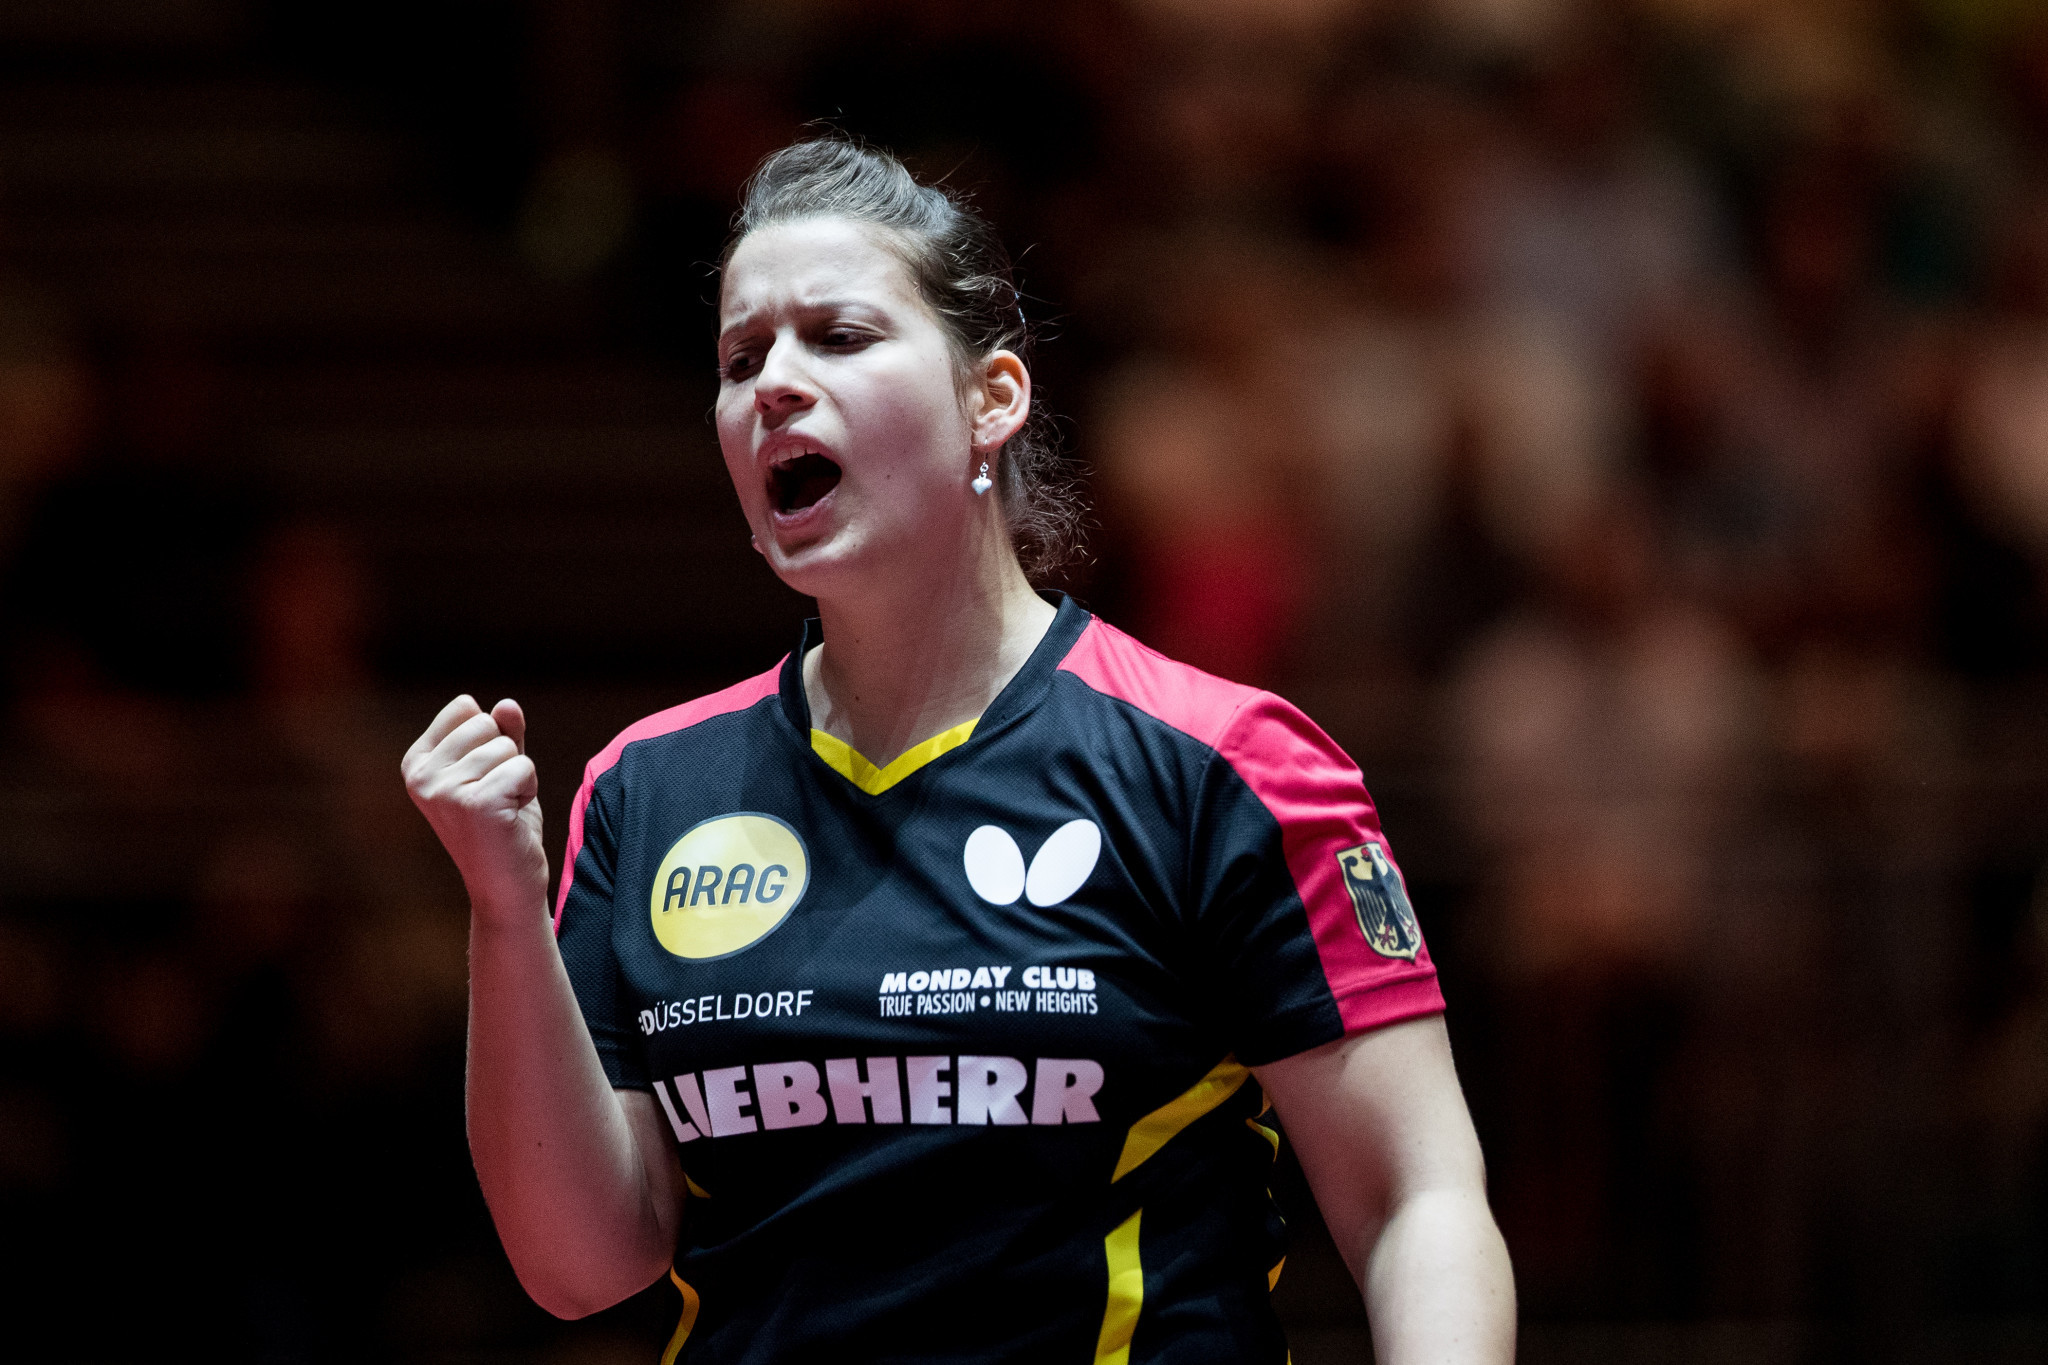 Germany's Petrissa Solja came back from 3-0 down to win the women's singles final at the ETTU Europe Top 16 Cup in Montreux ©Getty Images